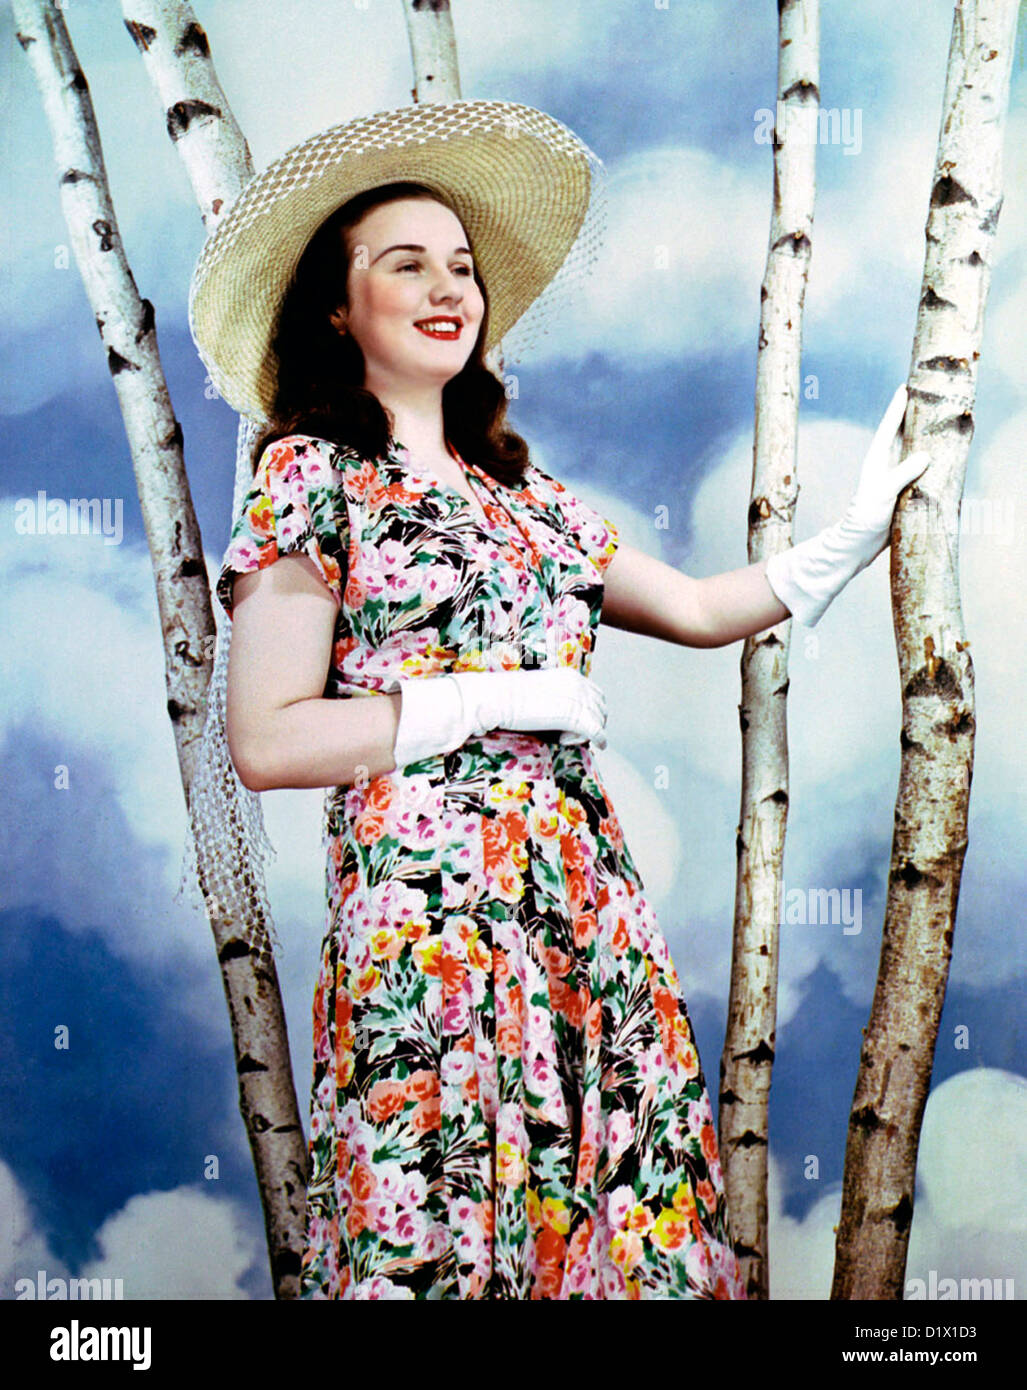 DEANNA DURBIN Canadian-American film actress about 1945 Stock Photo